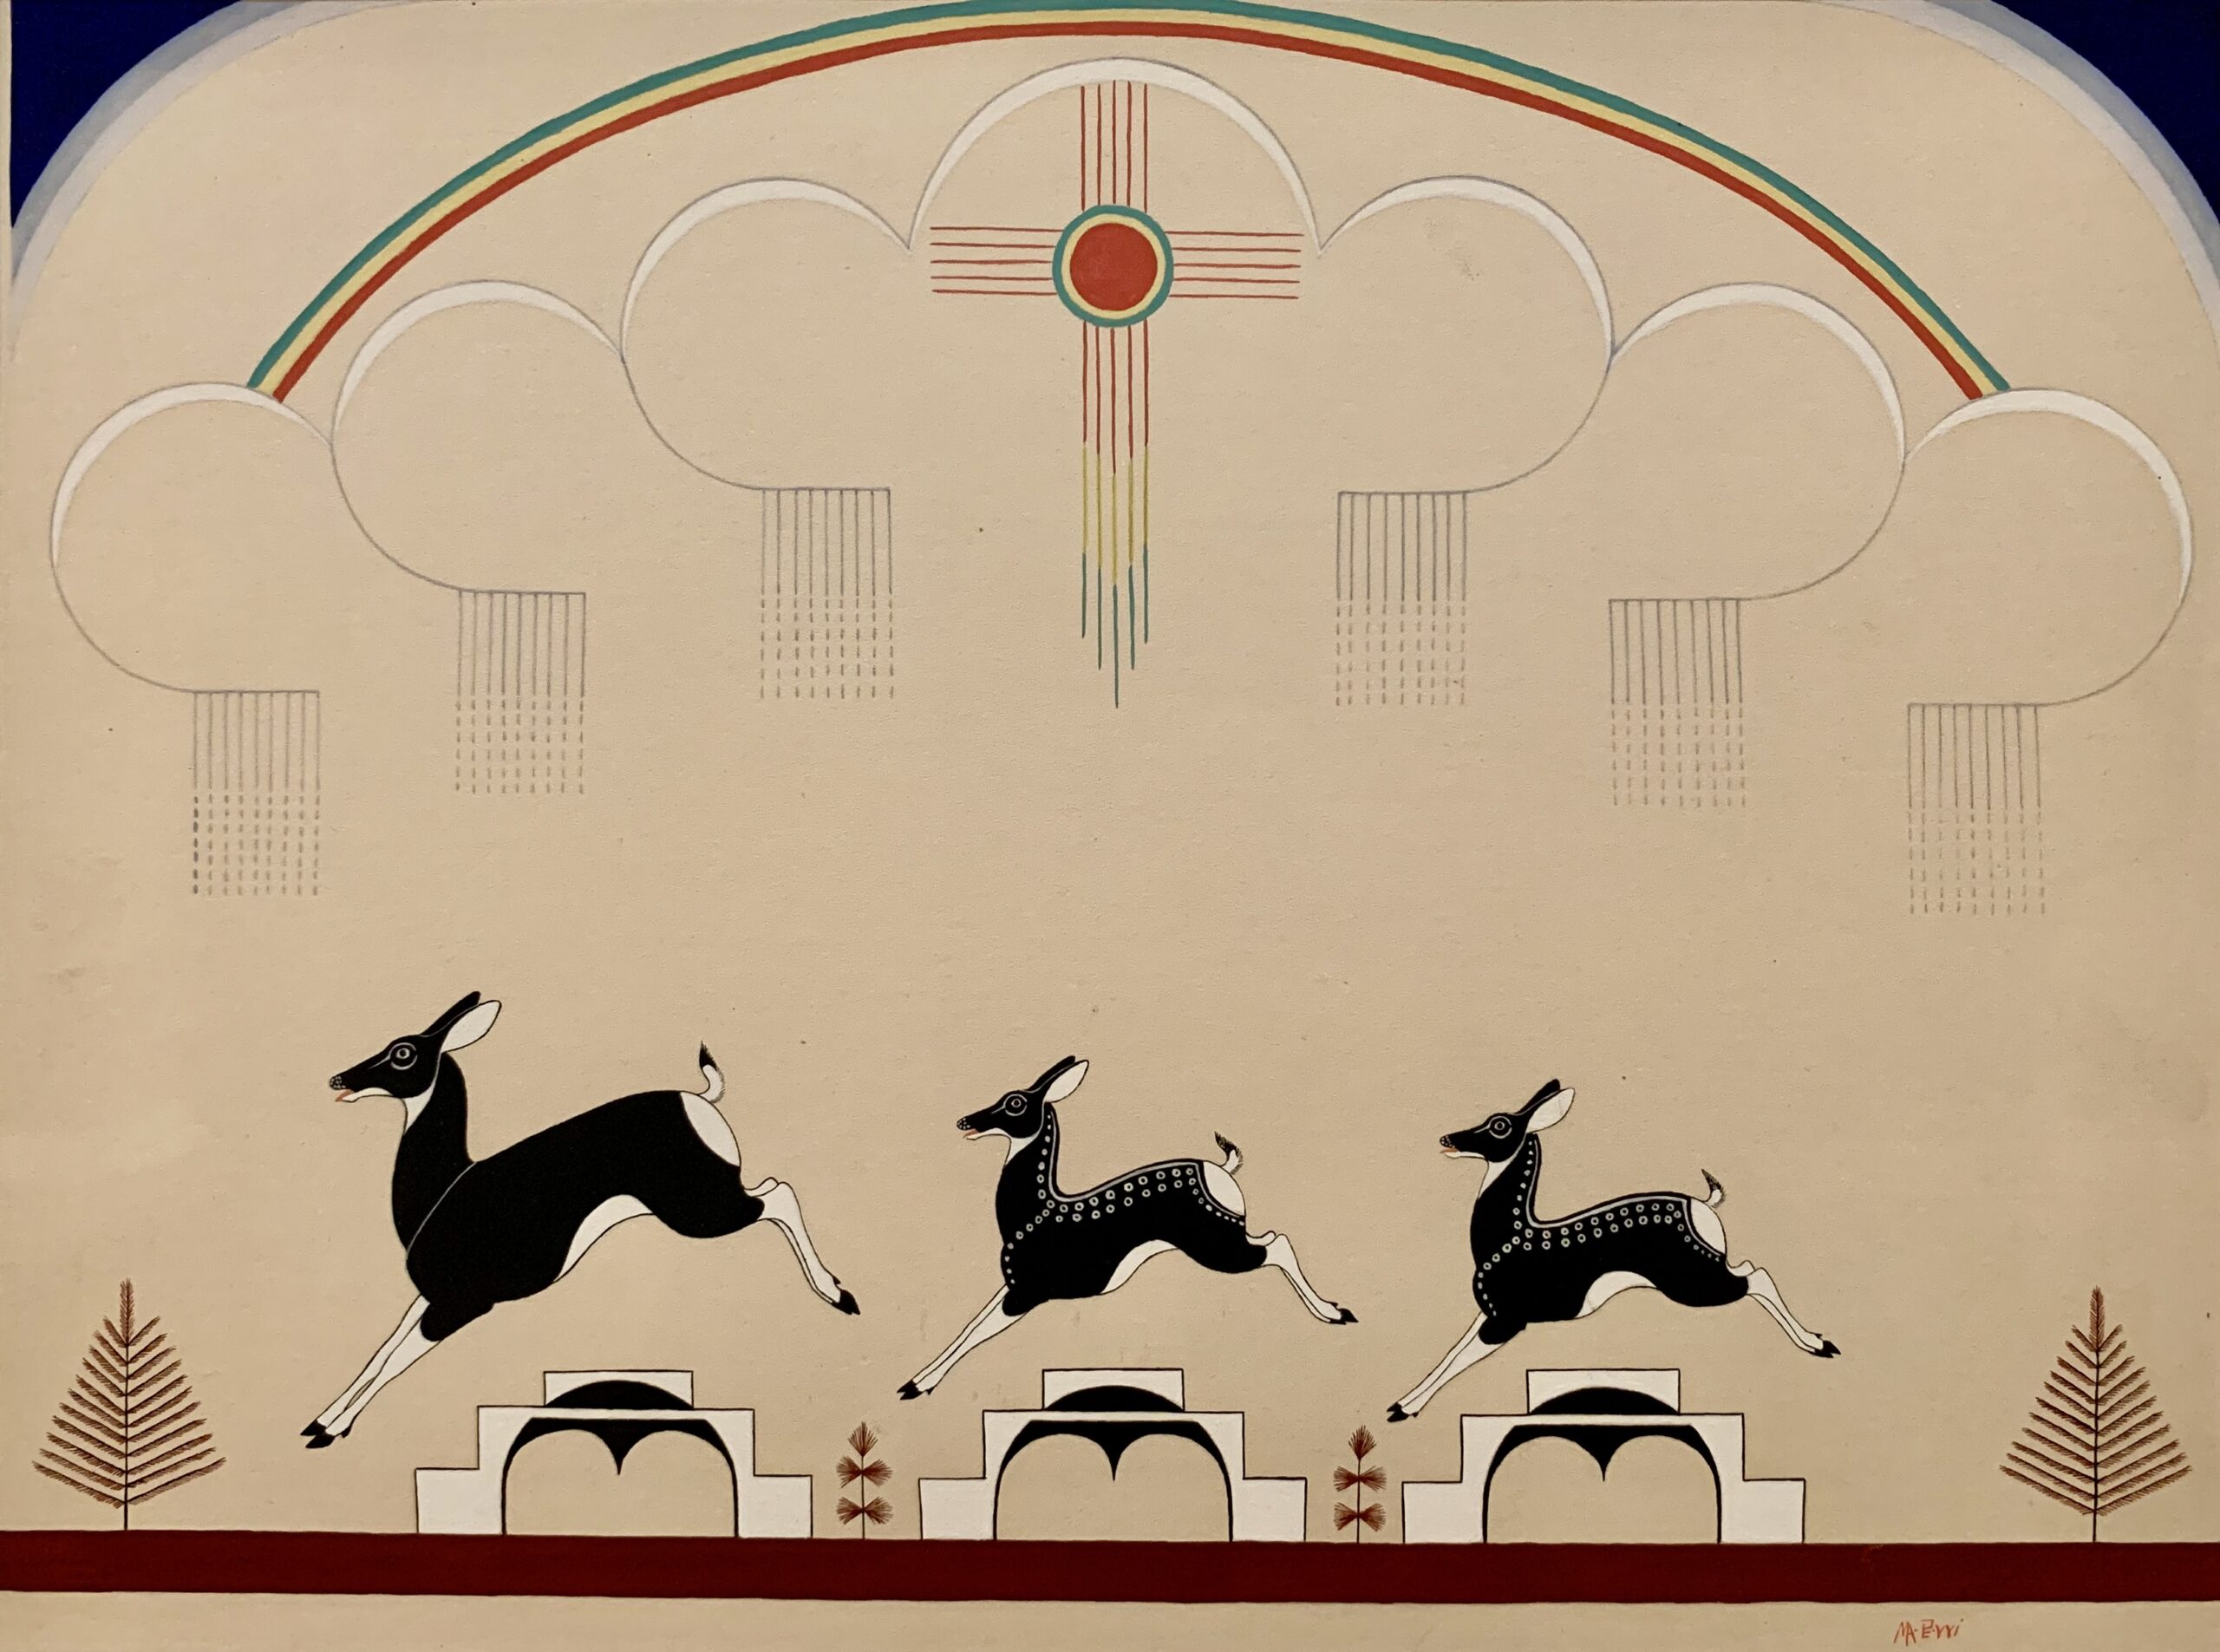 Native American Art in the Spotlight: Changes at Cleveland Museum of Art